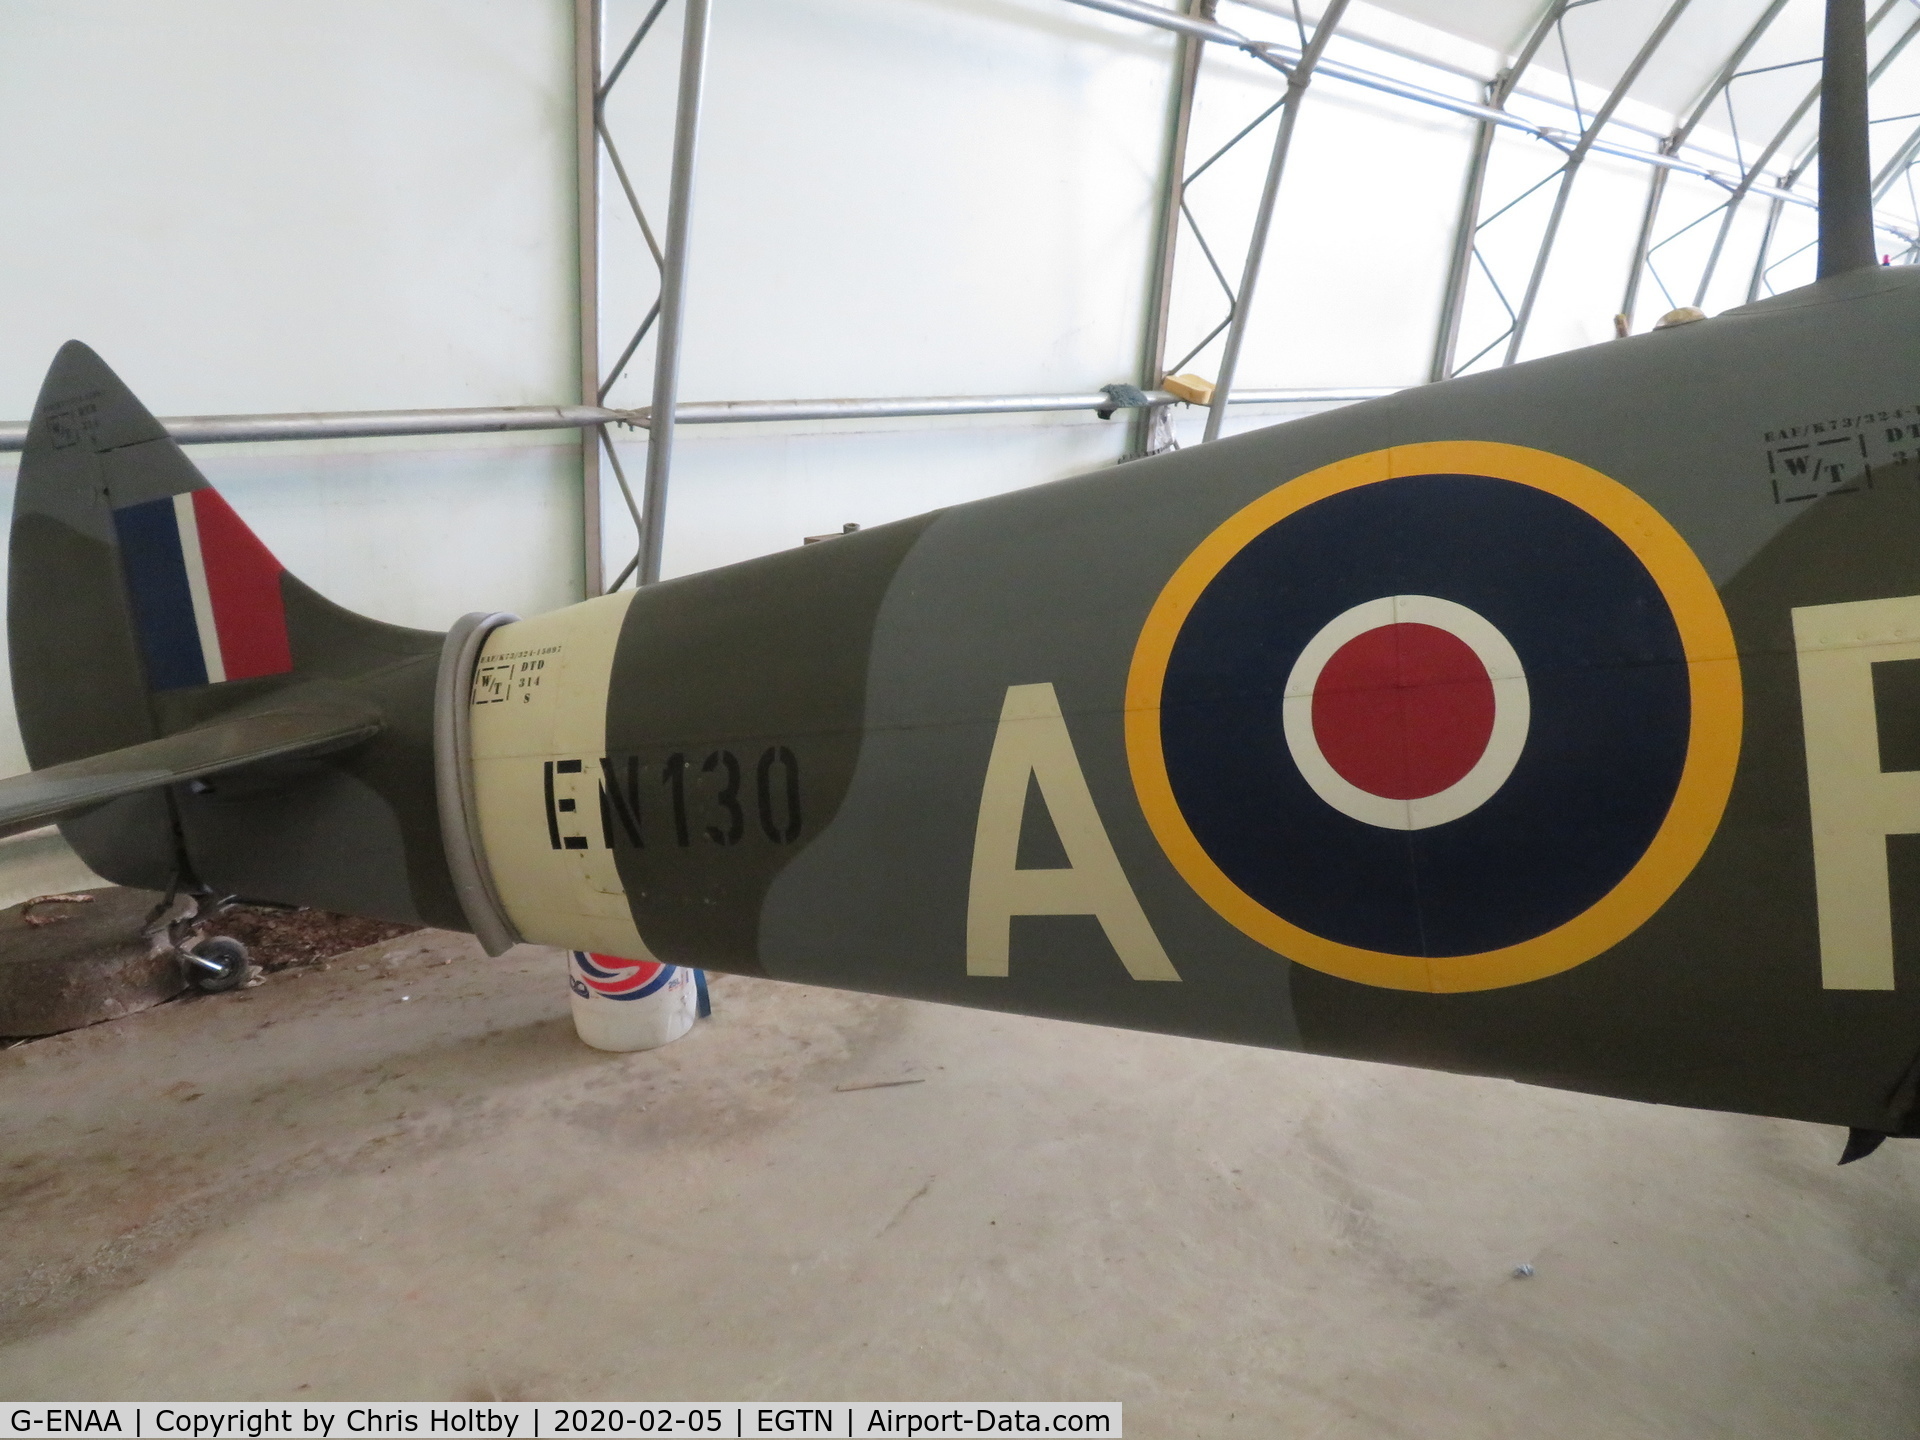 G-ENAA, 2013 Supermarine Aircraft Spitfire Mk.26B C/N LAA 324-15097, Rear section of the Mk. 26 Spitfire at Enstone